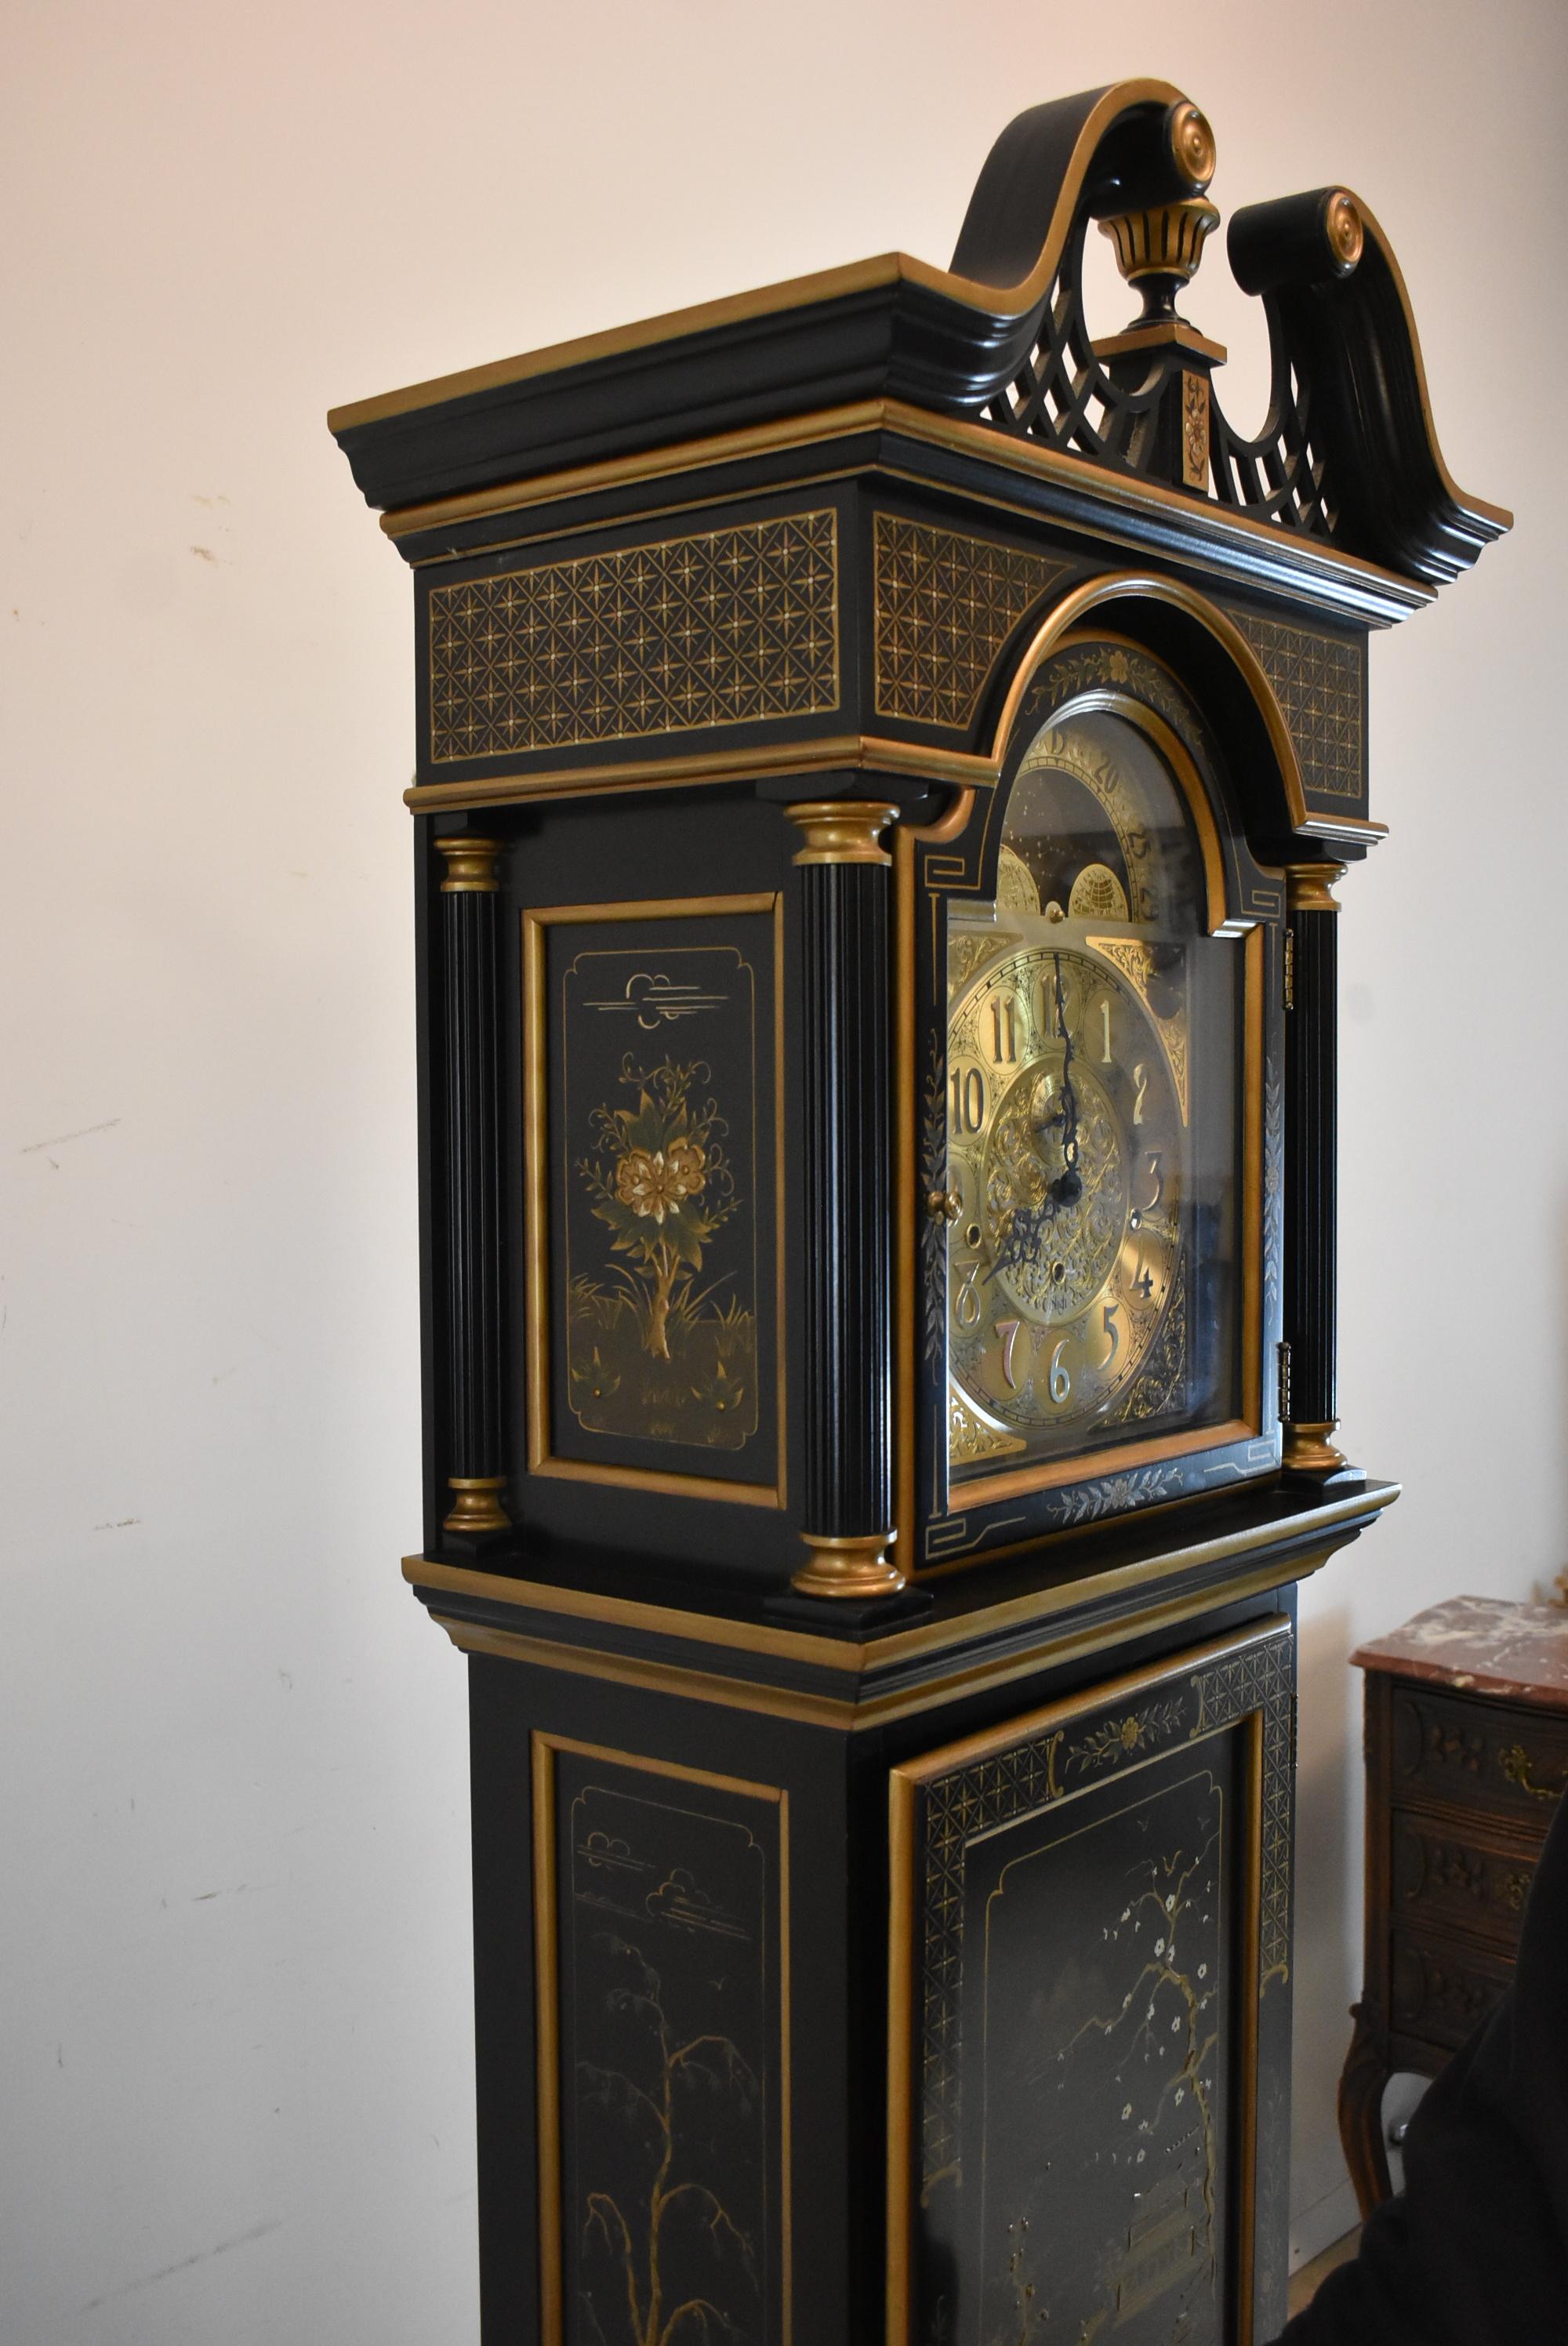 Beautifully decorated black chinoiserie grandfather clock by Sligh. Broken arch top with center finial all hand painted. Brass dial has moon phase. Multiple chime tone and silent setting. Model # 0996-1-BD. Running order.